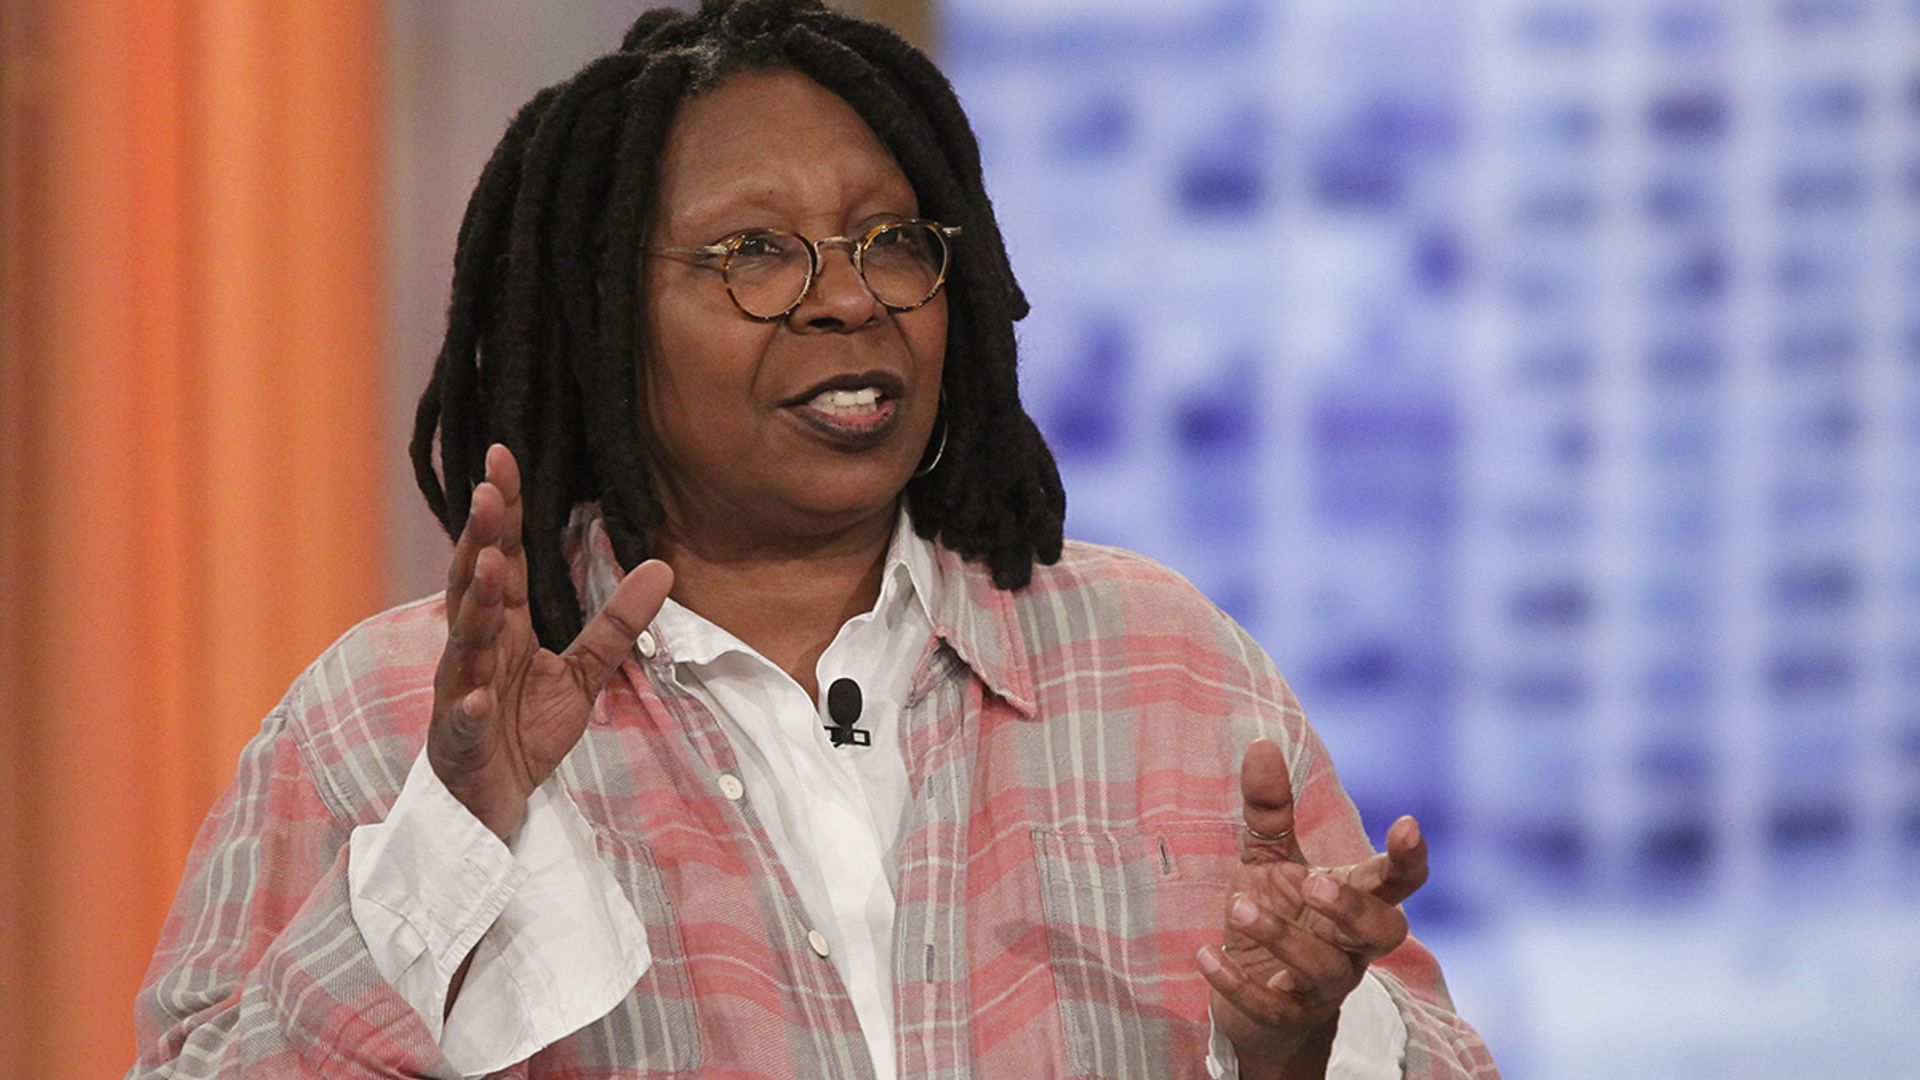 whoopi goldberg hosts the view